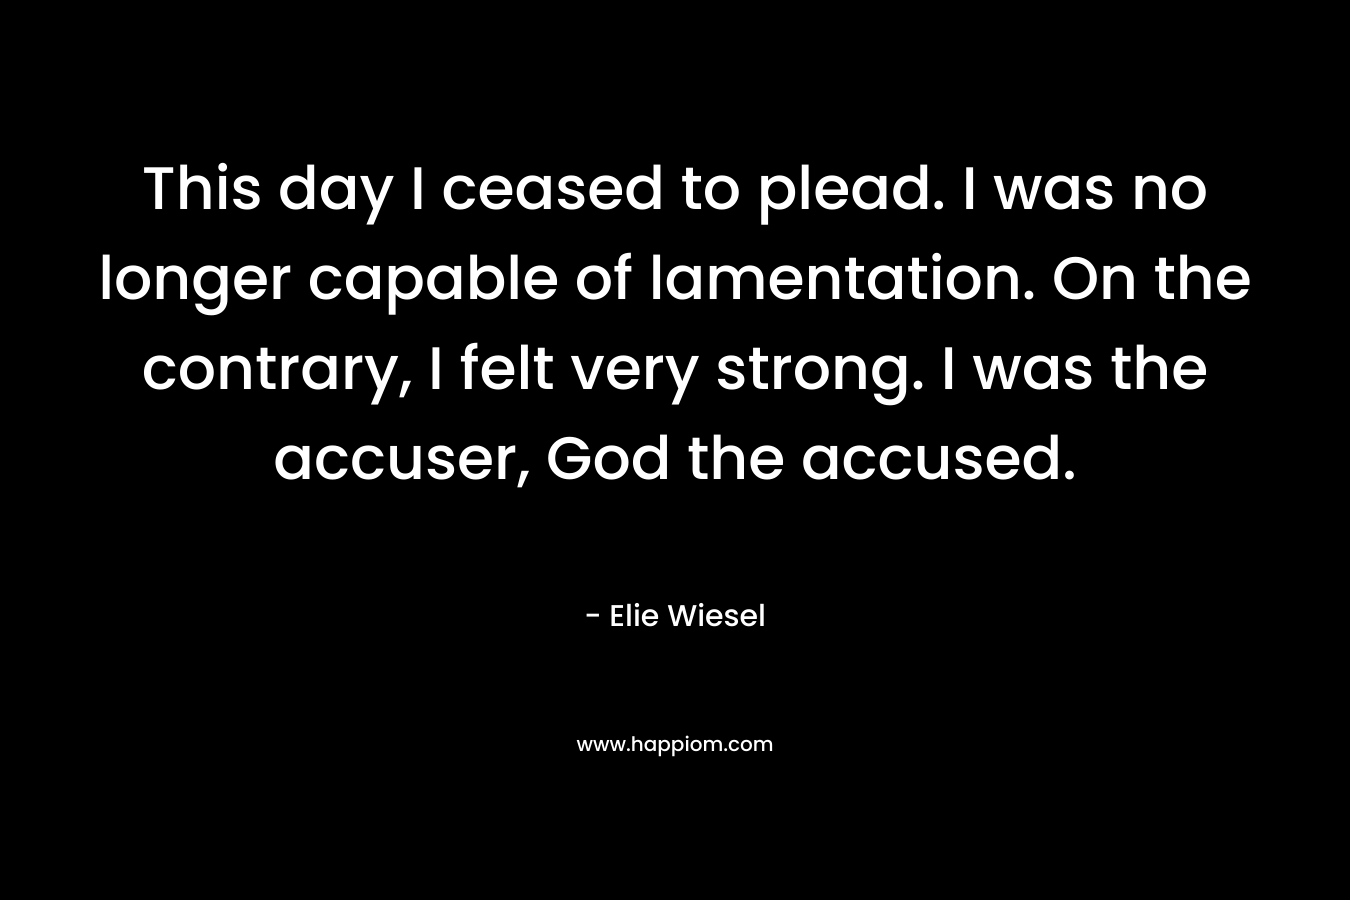 This day I ceased to plead. I was no longer capable of lamentation. On the contrary, I felt very strong. I was the accuser, God the accused. – Elie Wiesel